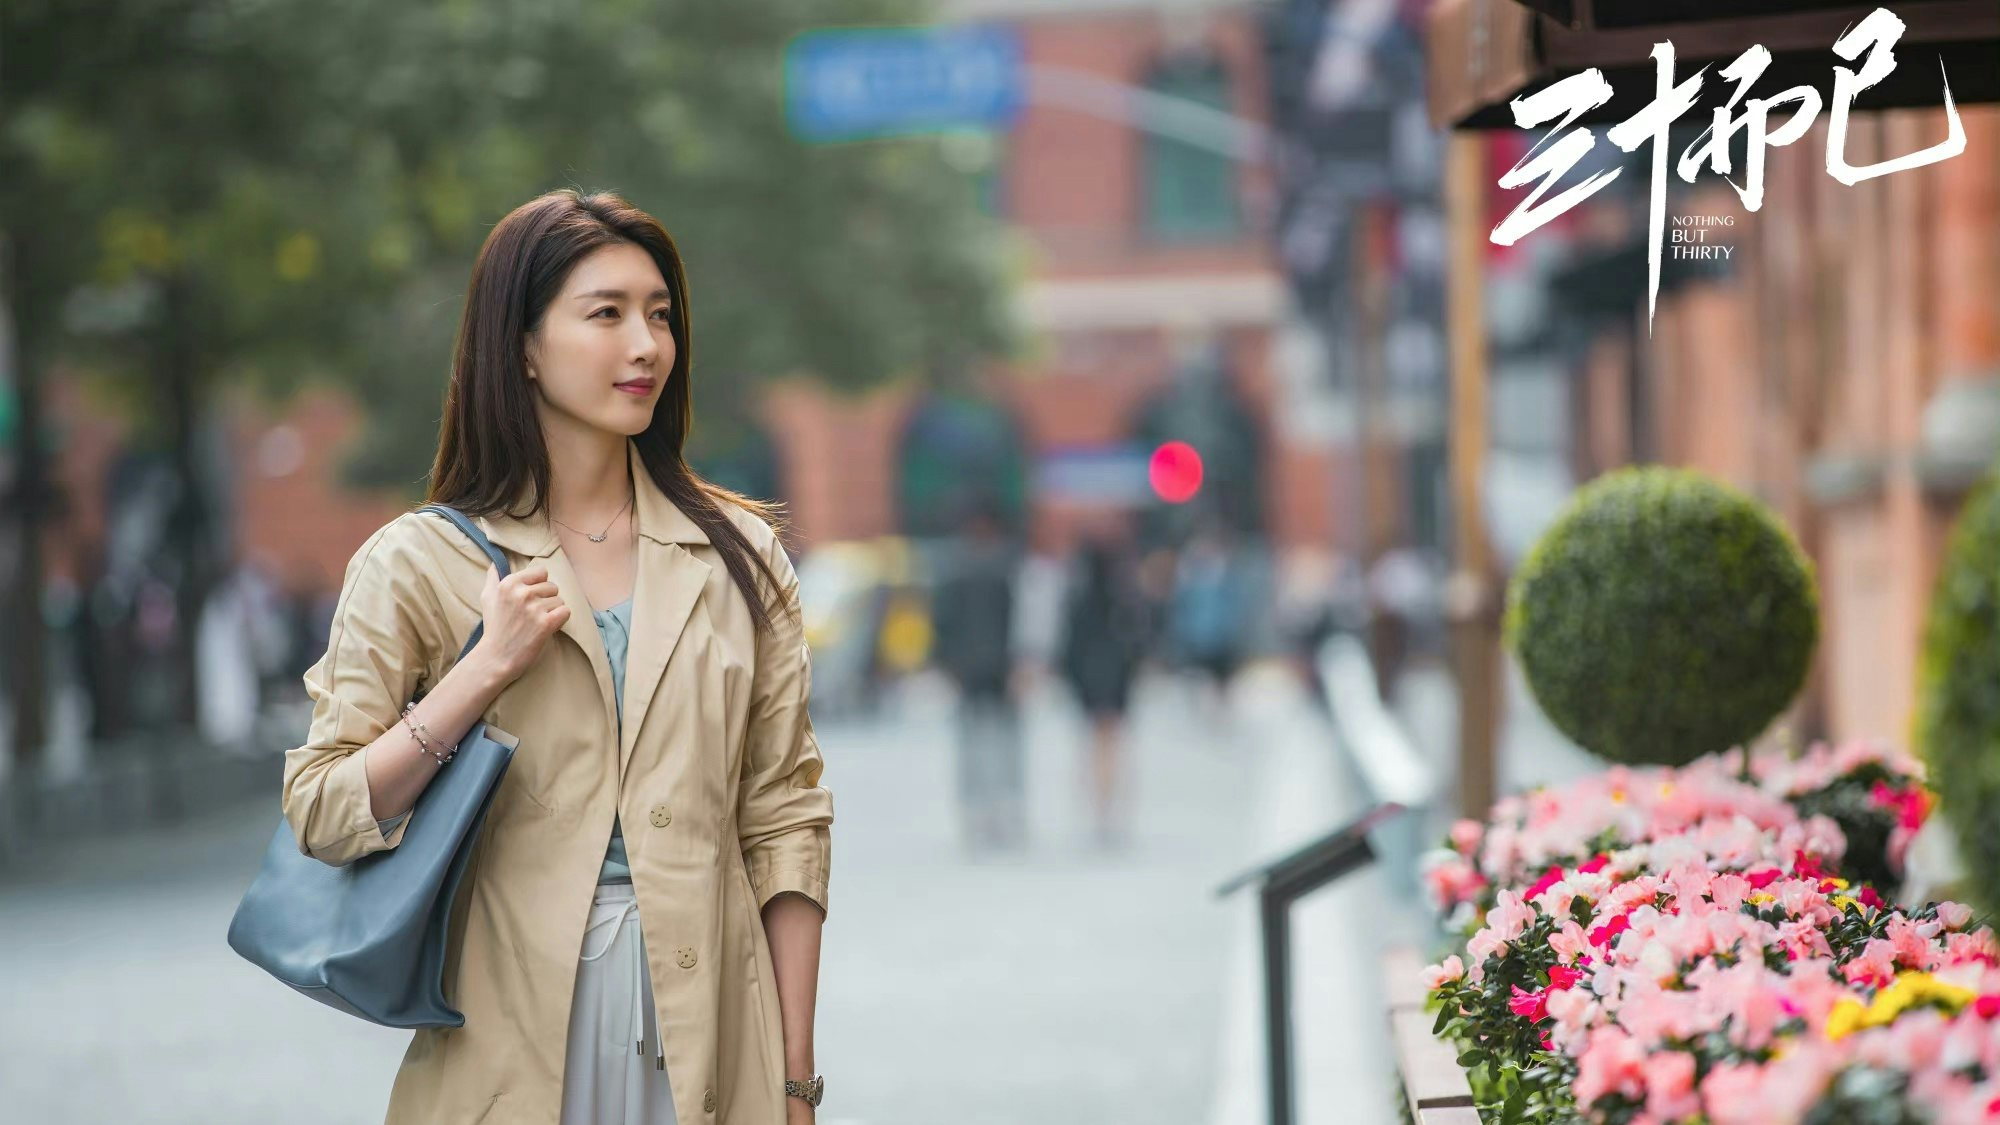 The popularity of C-dramas has created an opening for brands. But pleasing social media-savvy fans requires careful placement according to accepted wisdom about fashion and culture. Photo: Nothing But Thirty